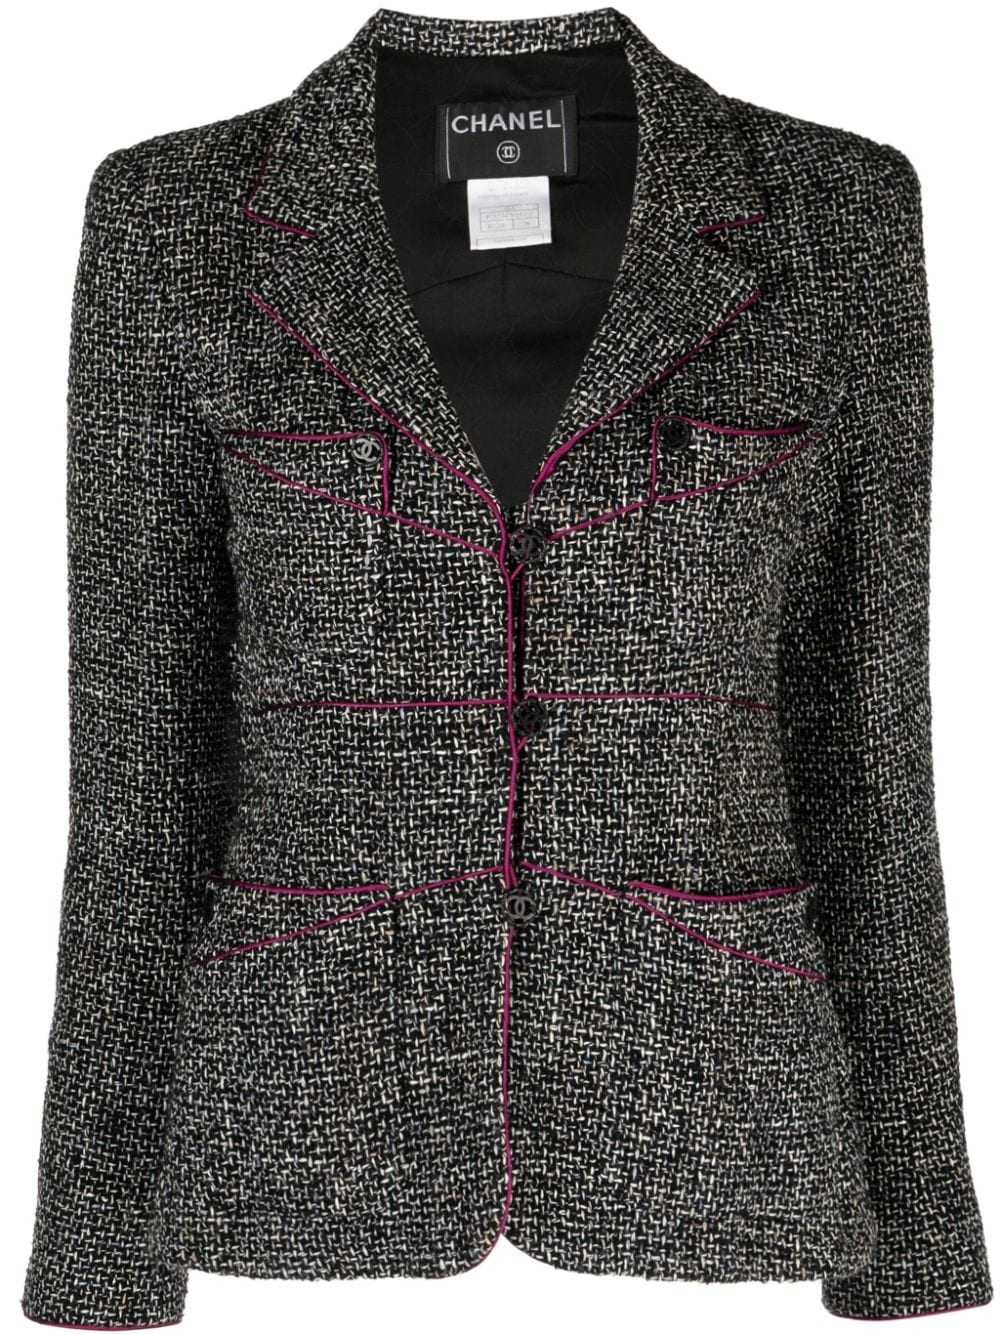 CHANEL Pre-Owned 2003 single-breasted tweed jacke… - image 1